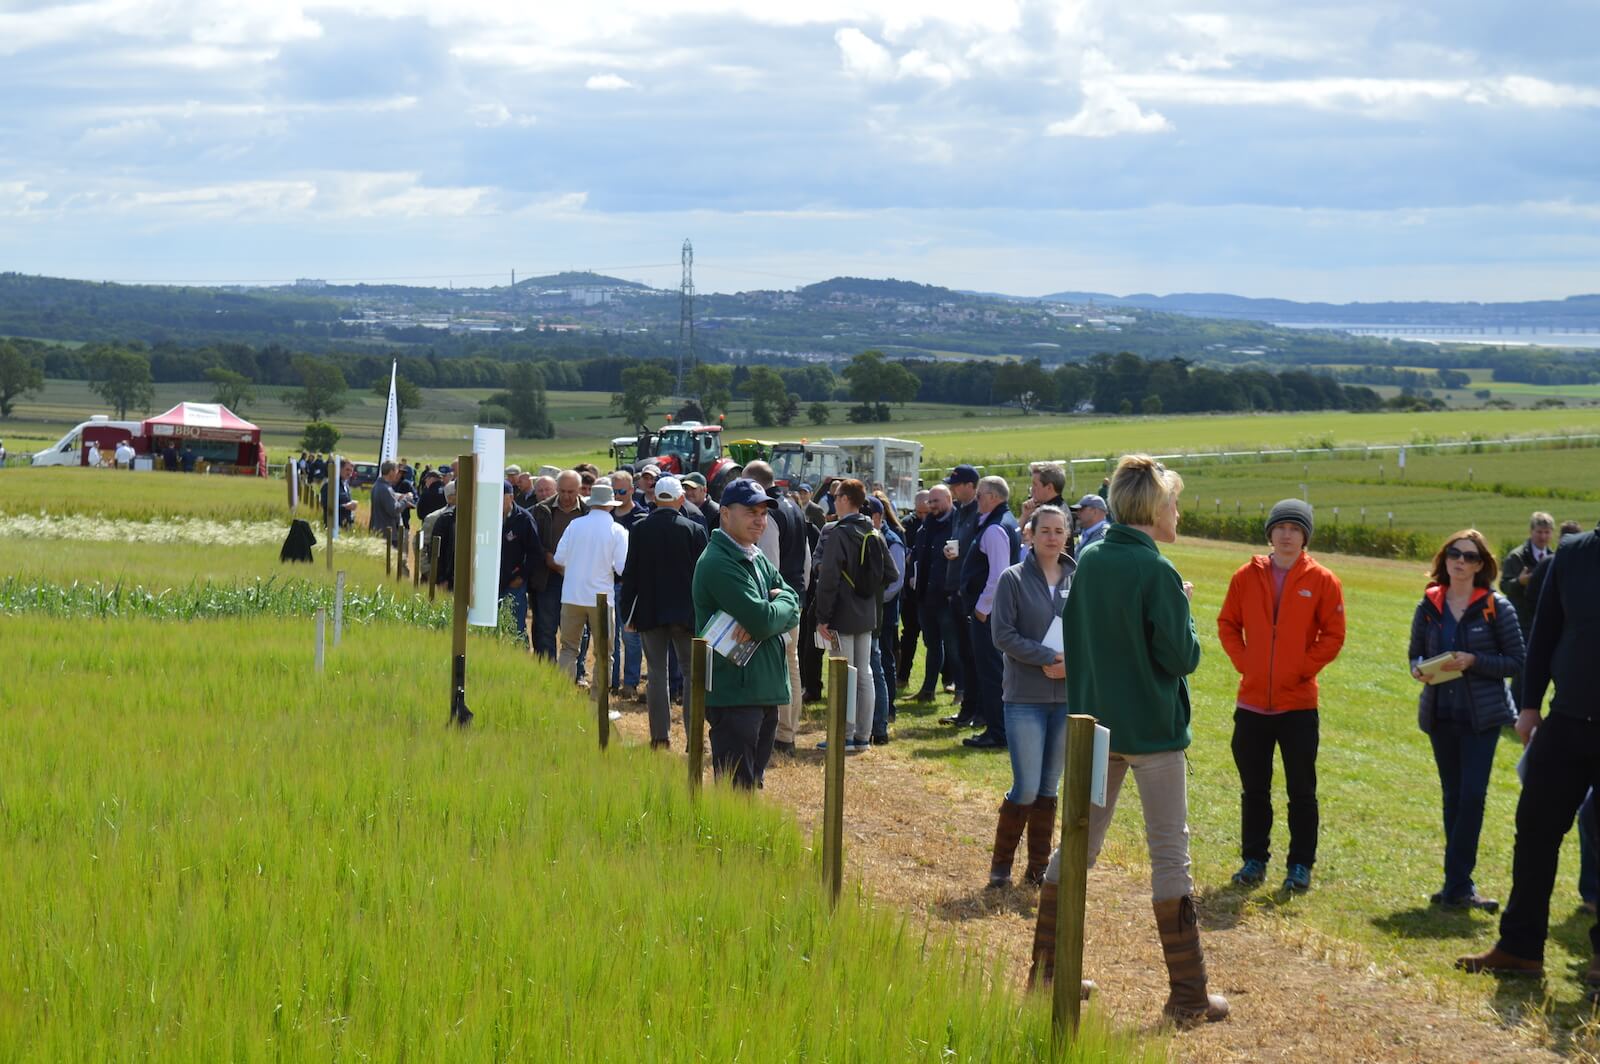 Image of Arable Scotland's inaugural event in 2019